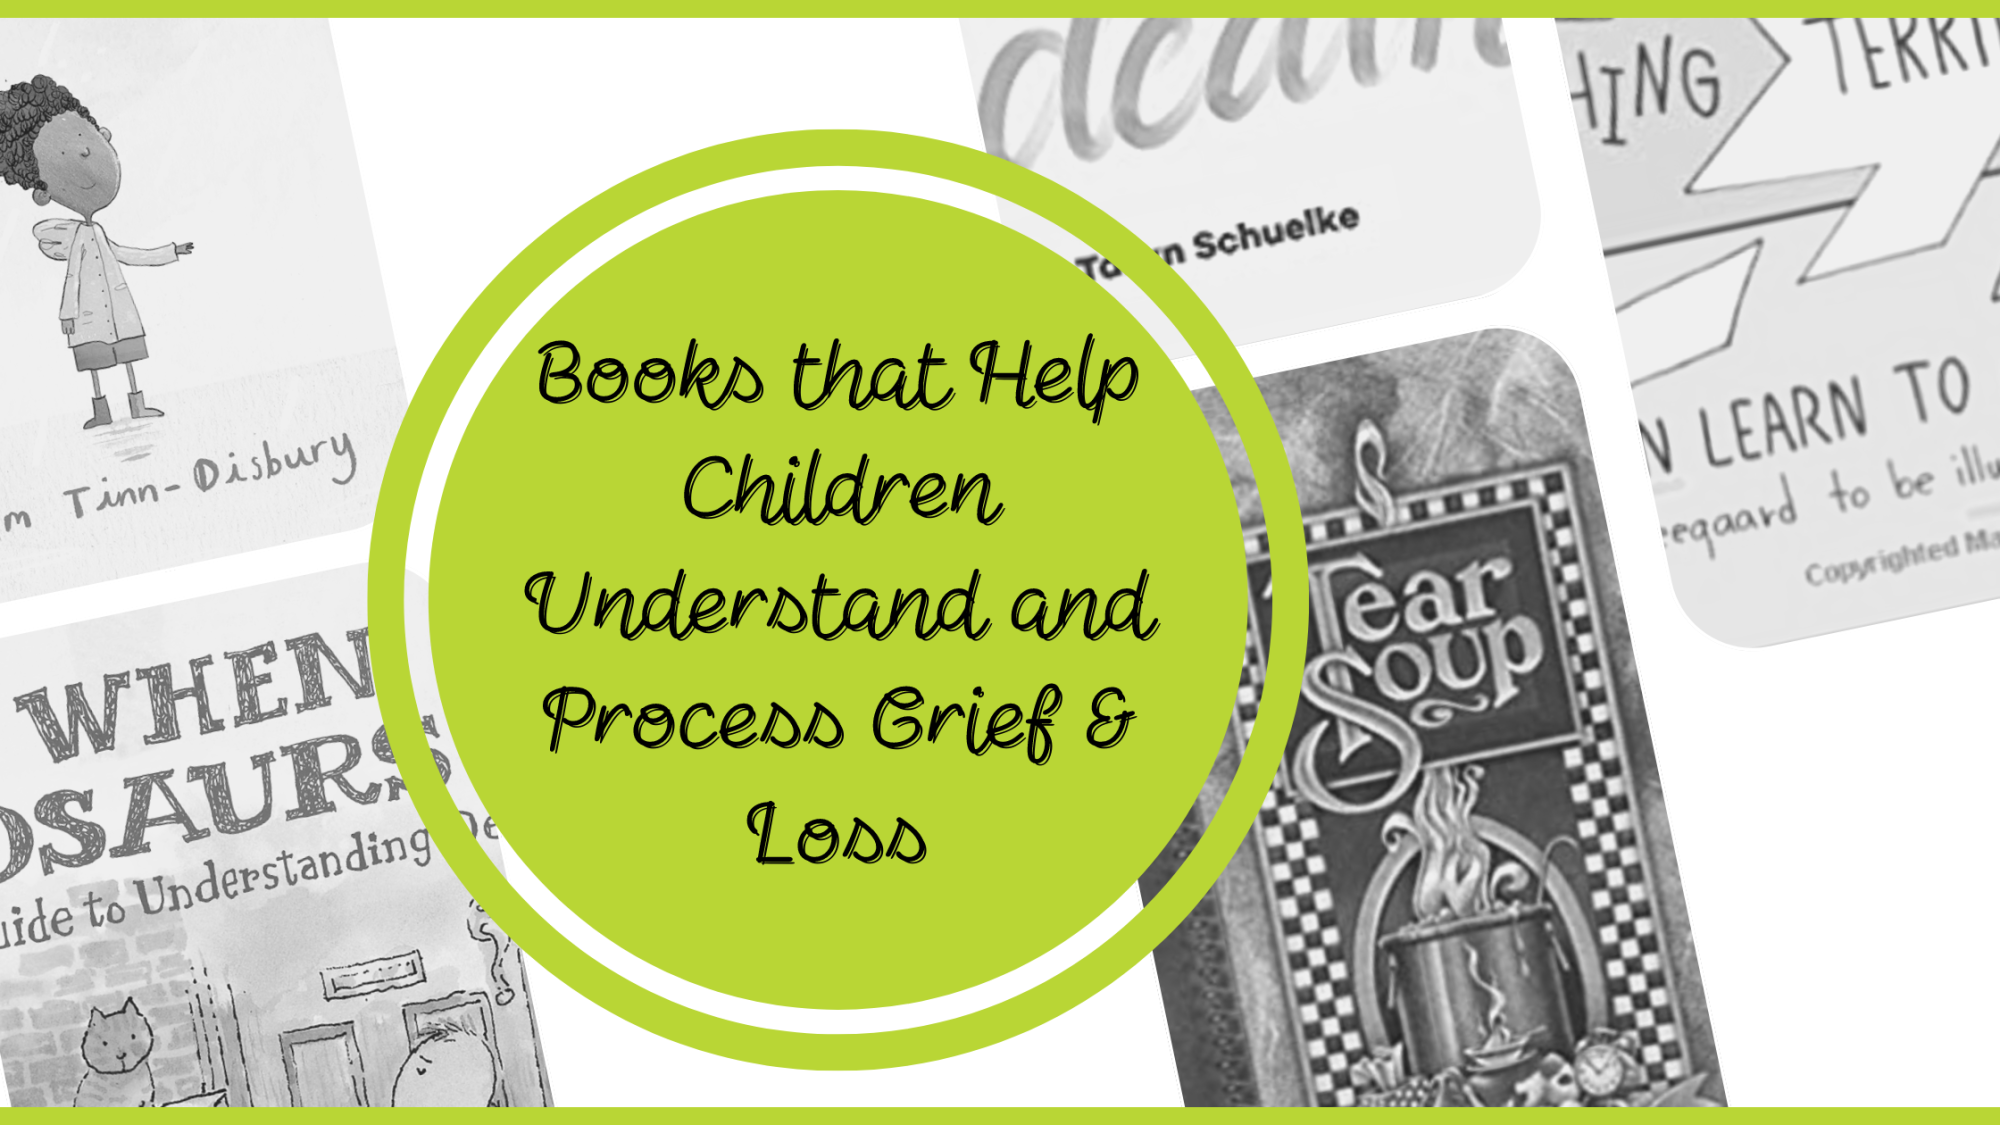 Green circle with the title "Books that Help Children Understand and Process Grief & Loss" with black font. There are black and white images of books in the background